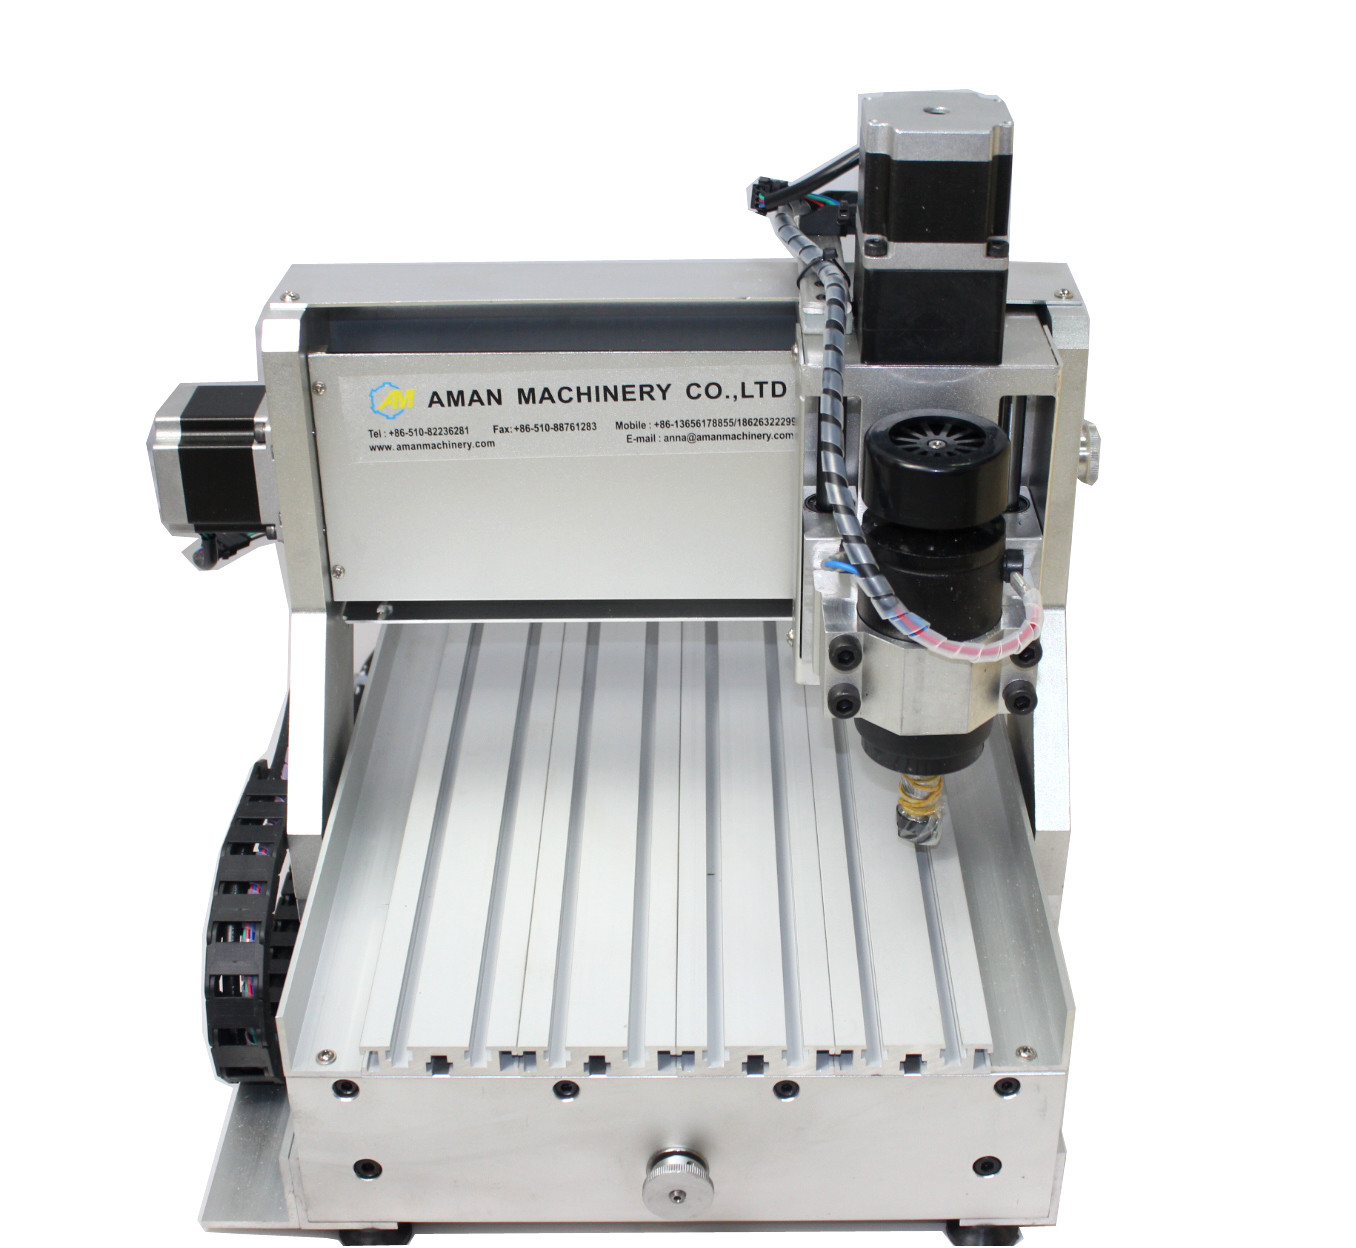  2030 500W 4 AXIS Small wood carving milling cutting machine wood design router for sale Manufactures